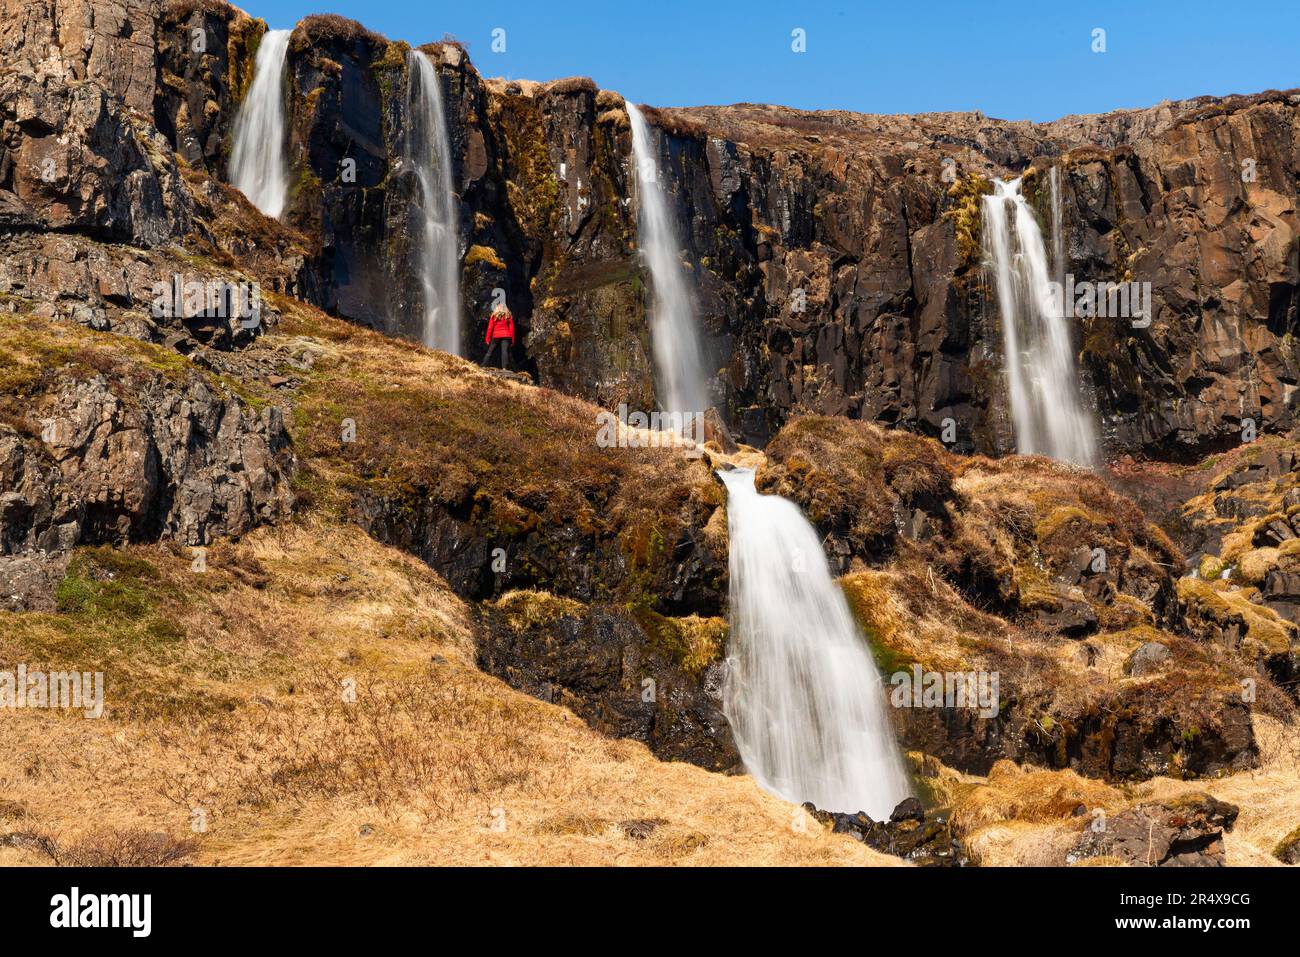 Scenic view of a woman standing on a cliff side slope in front of a series of waterfalls, some above and below, flowing from the craggy cliffs of t... Stock Photo